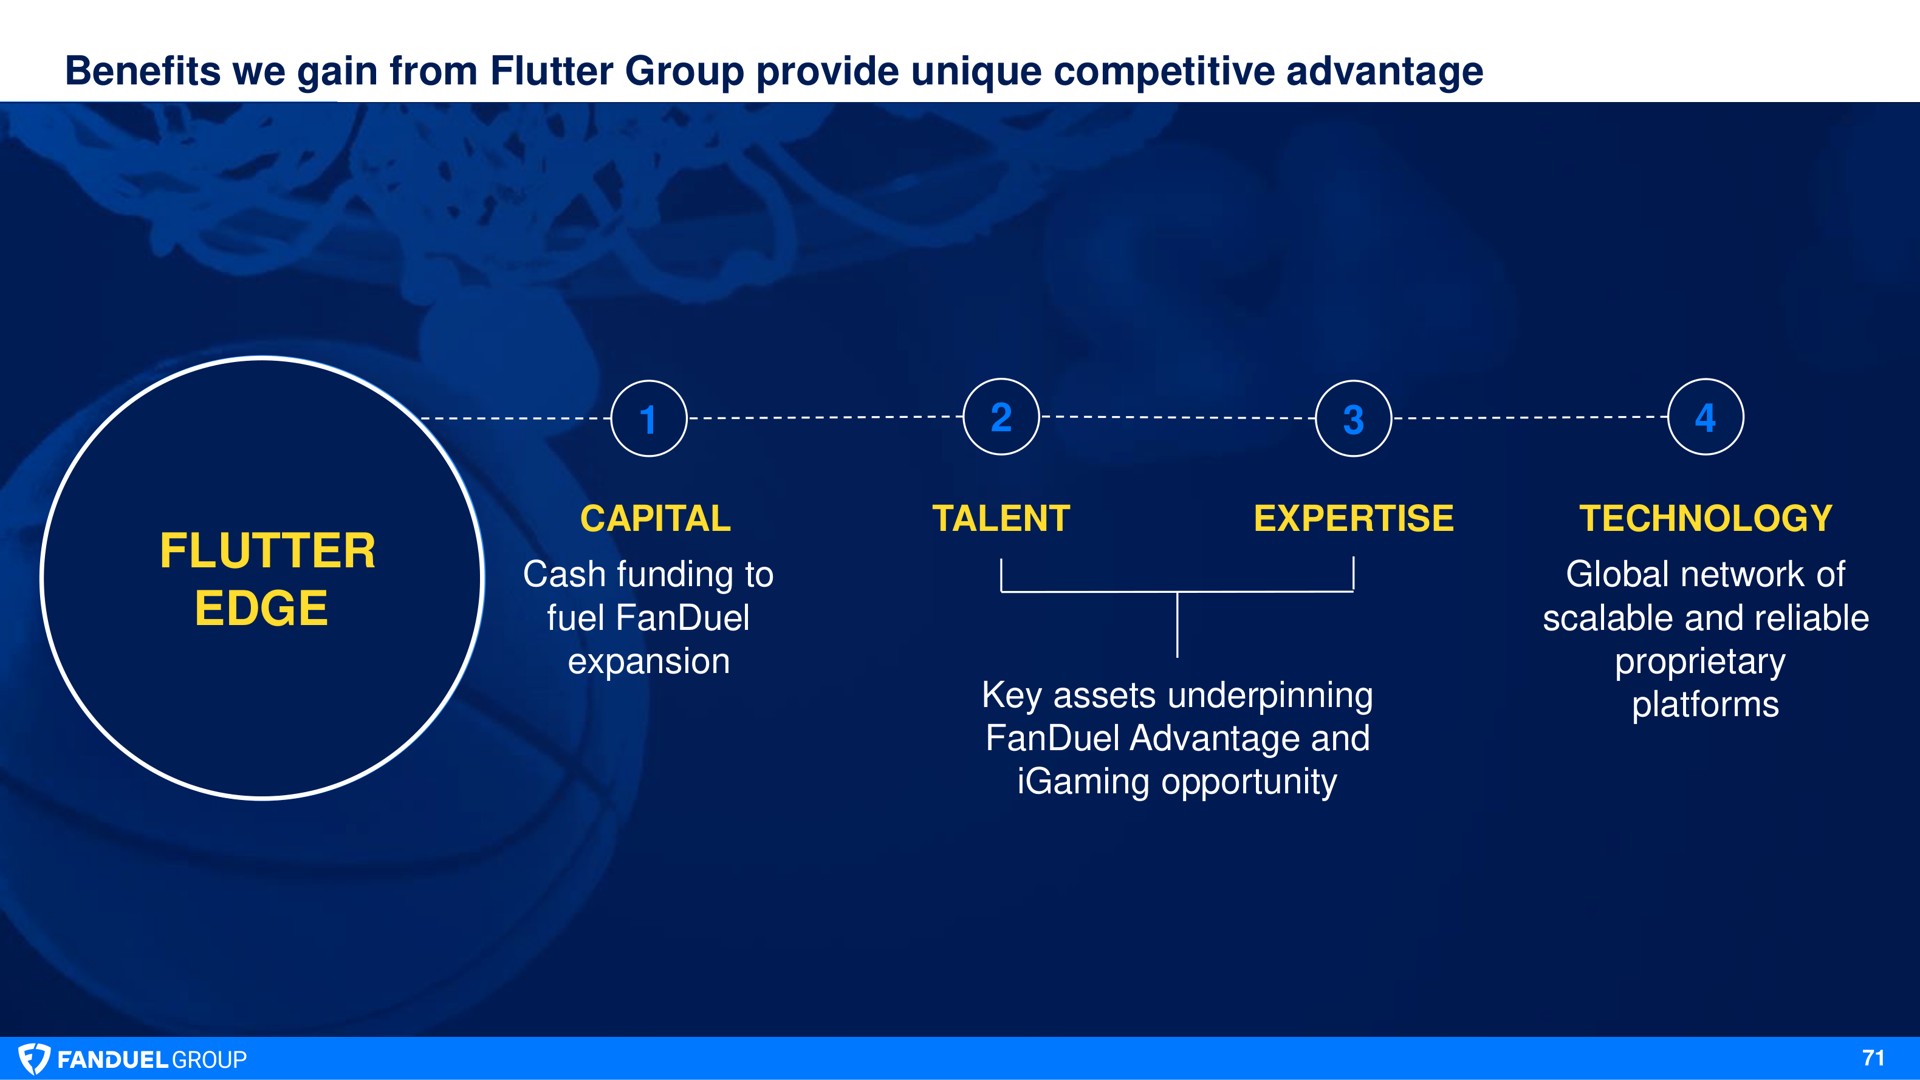 benefits we gain from flutter group provide unique competitive advantage flutter edge retain capital talent technology cash funding to fuel expansion global network of scalable and reliable proprietary platforms key assets underpinning advantage and opportunity | Flutter